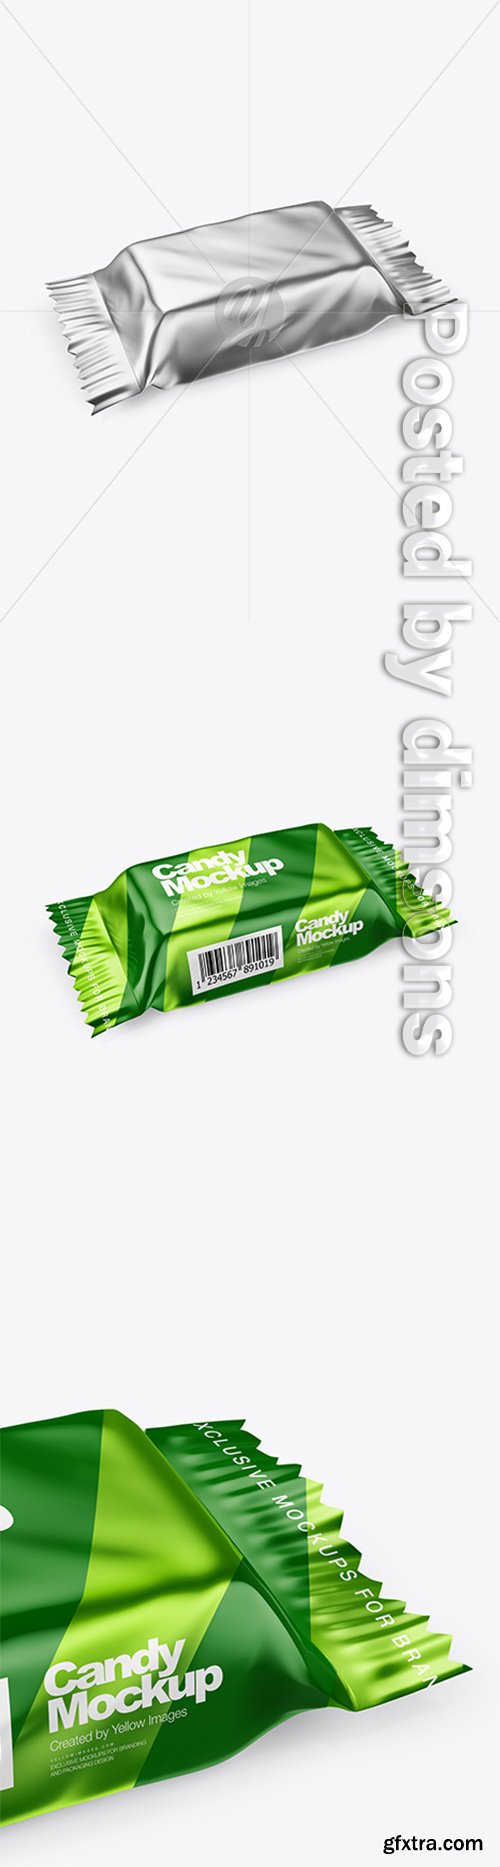 Metallic Candy Package Mockup - Half Side View 30122